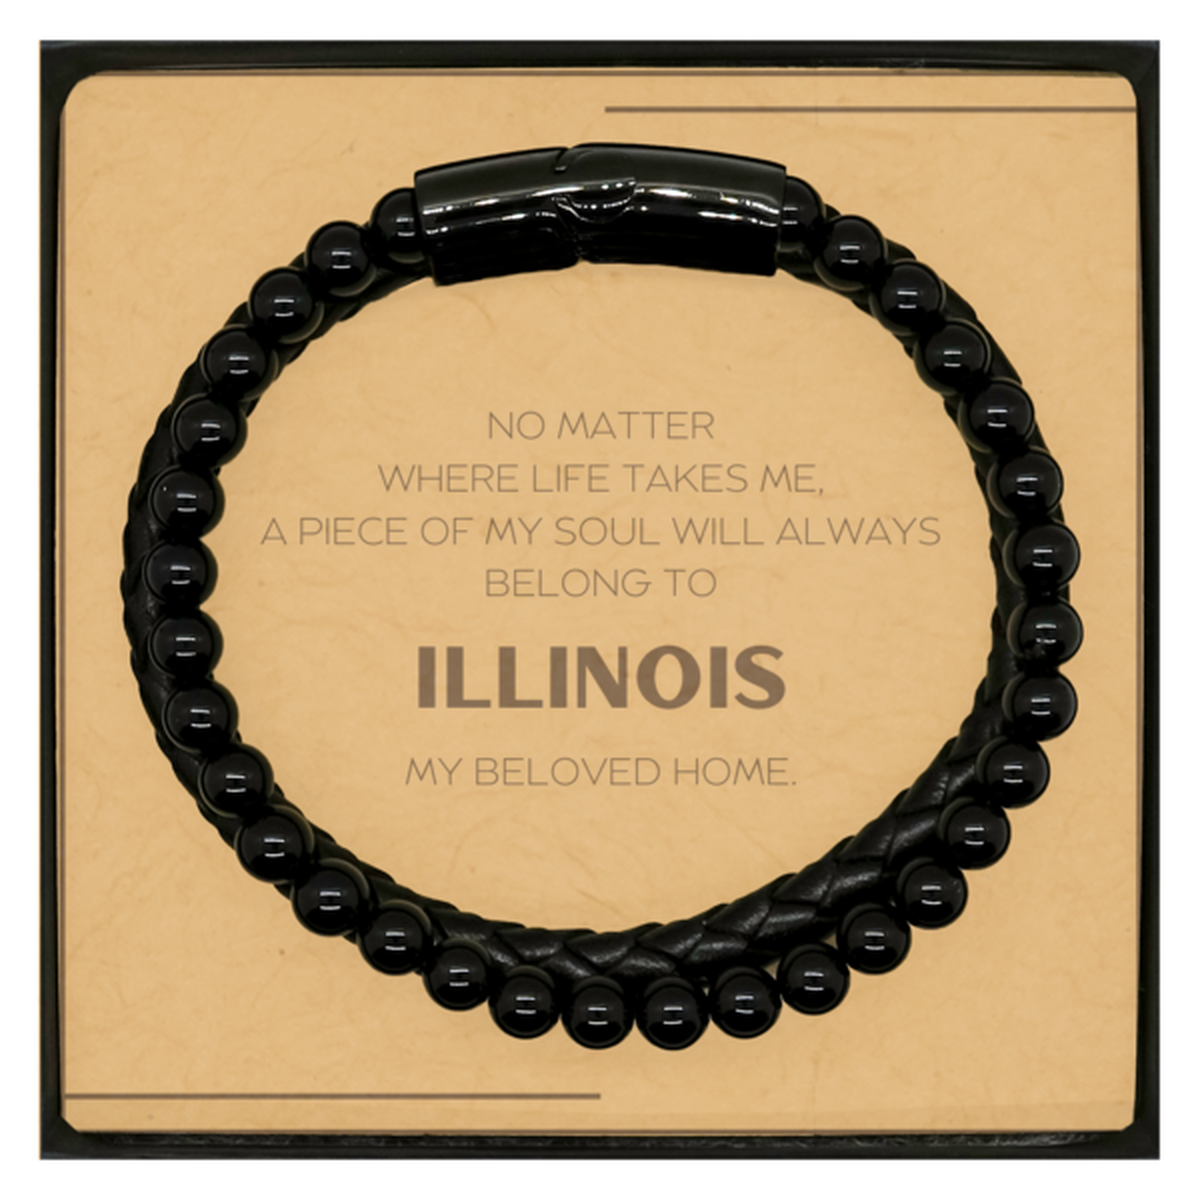 Love Illinois State Gifts, My soul will always belong to Illinois, Proud Stone Leather Bracelets, Birthday Christmas Unique Gifts For Illinois Men, Women, Friends